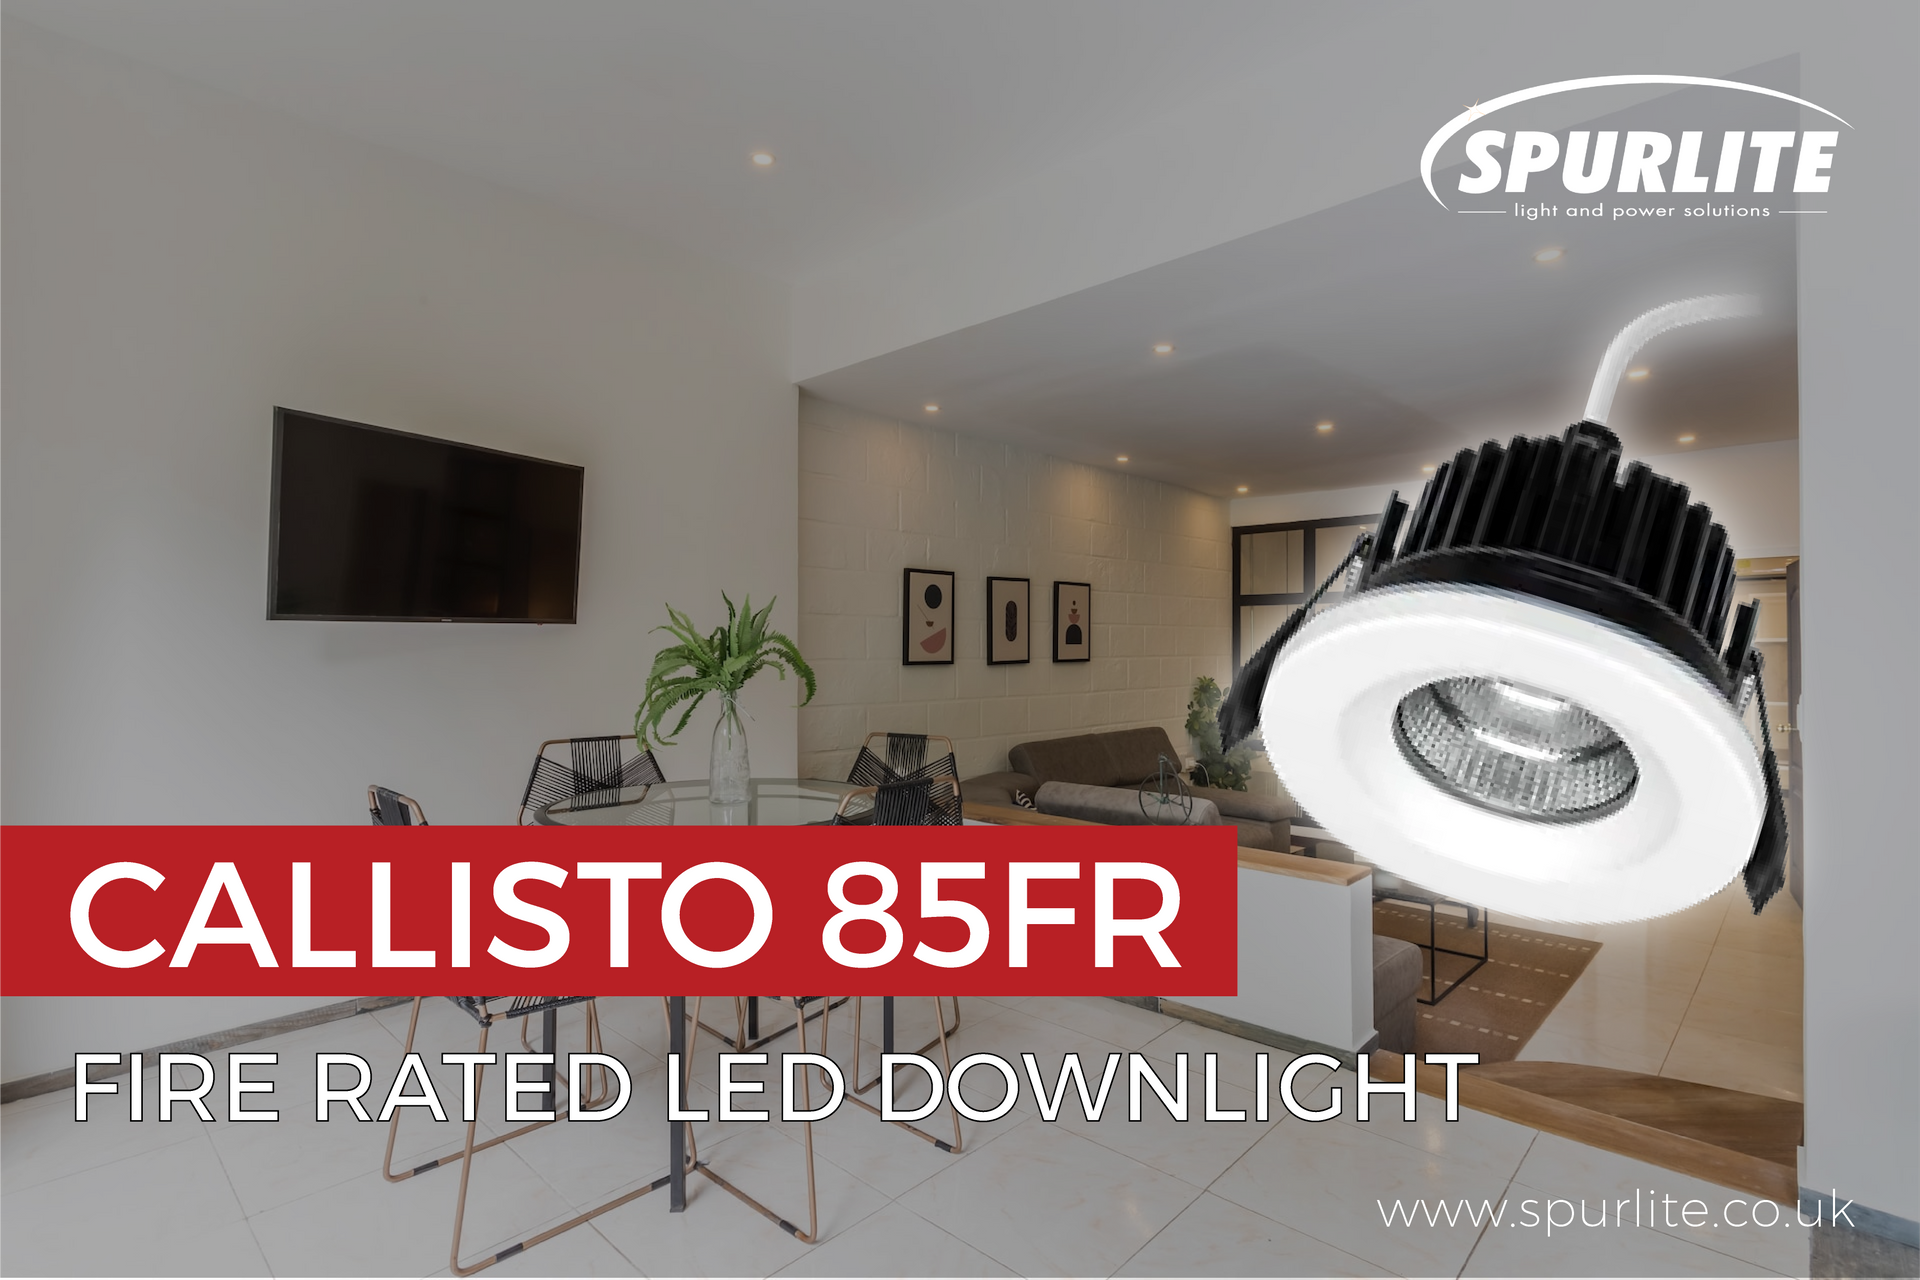 Callisto 85FR Fire Rated LED Downligh